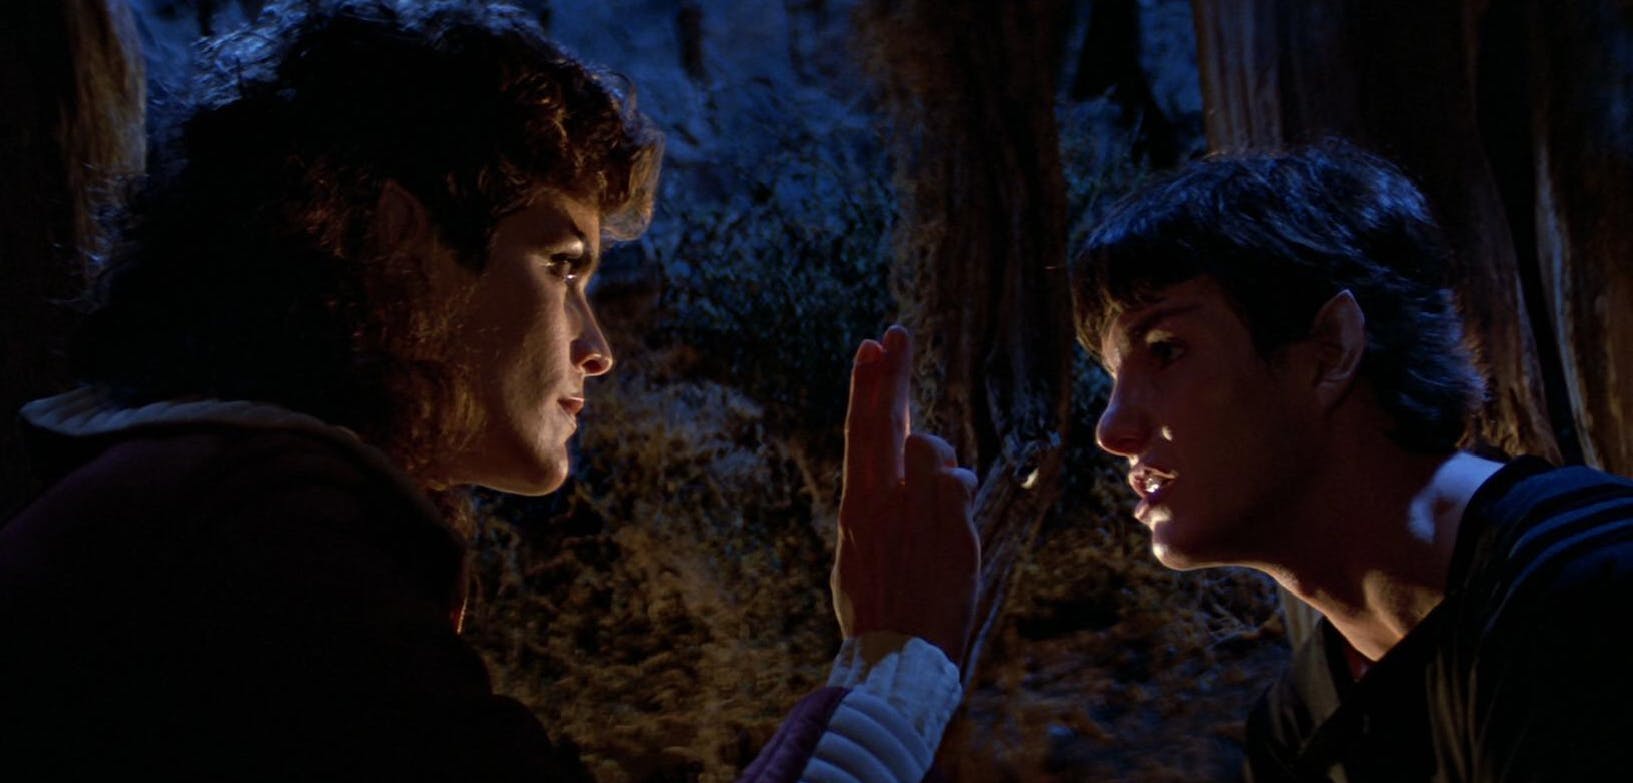 Saavik lifts up two fingers, a Vulcan gesture, as she stares directly into the eyes of a younger Spock in Star Trek III: The Search for Spock